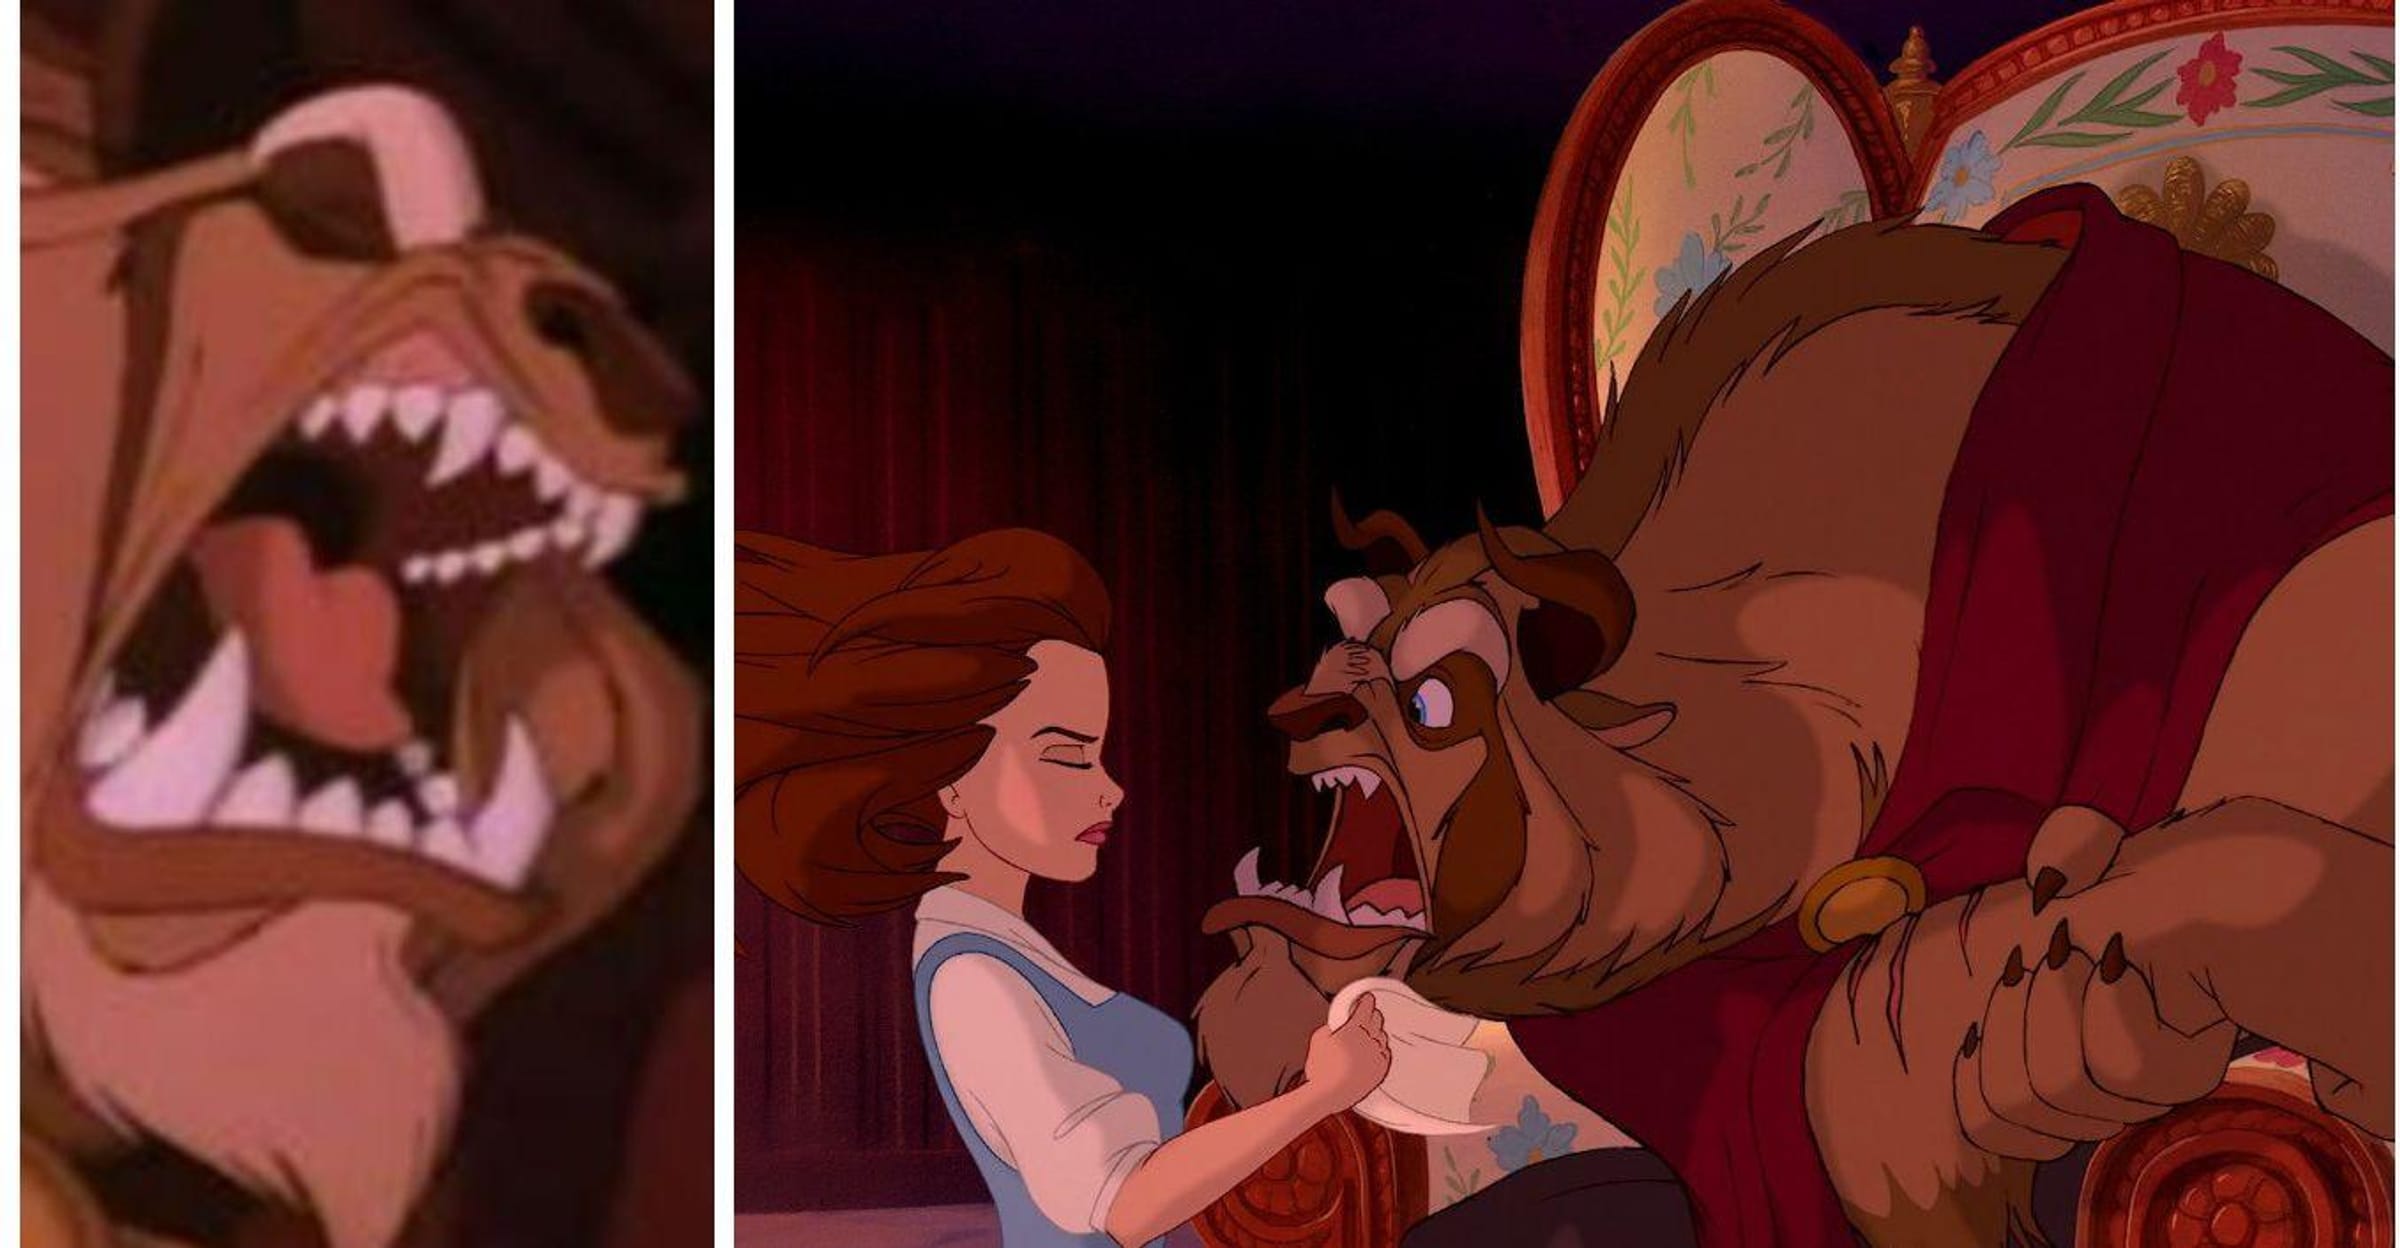 Beauty and the Beast porn pics wait for you to check them up